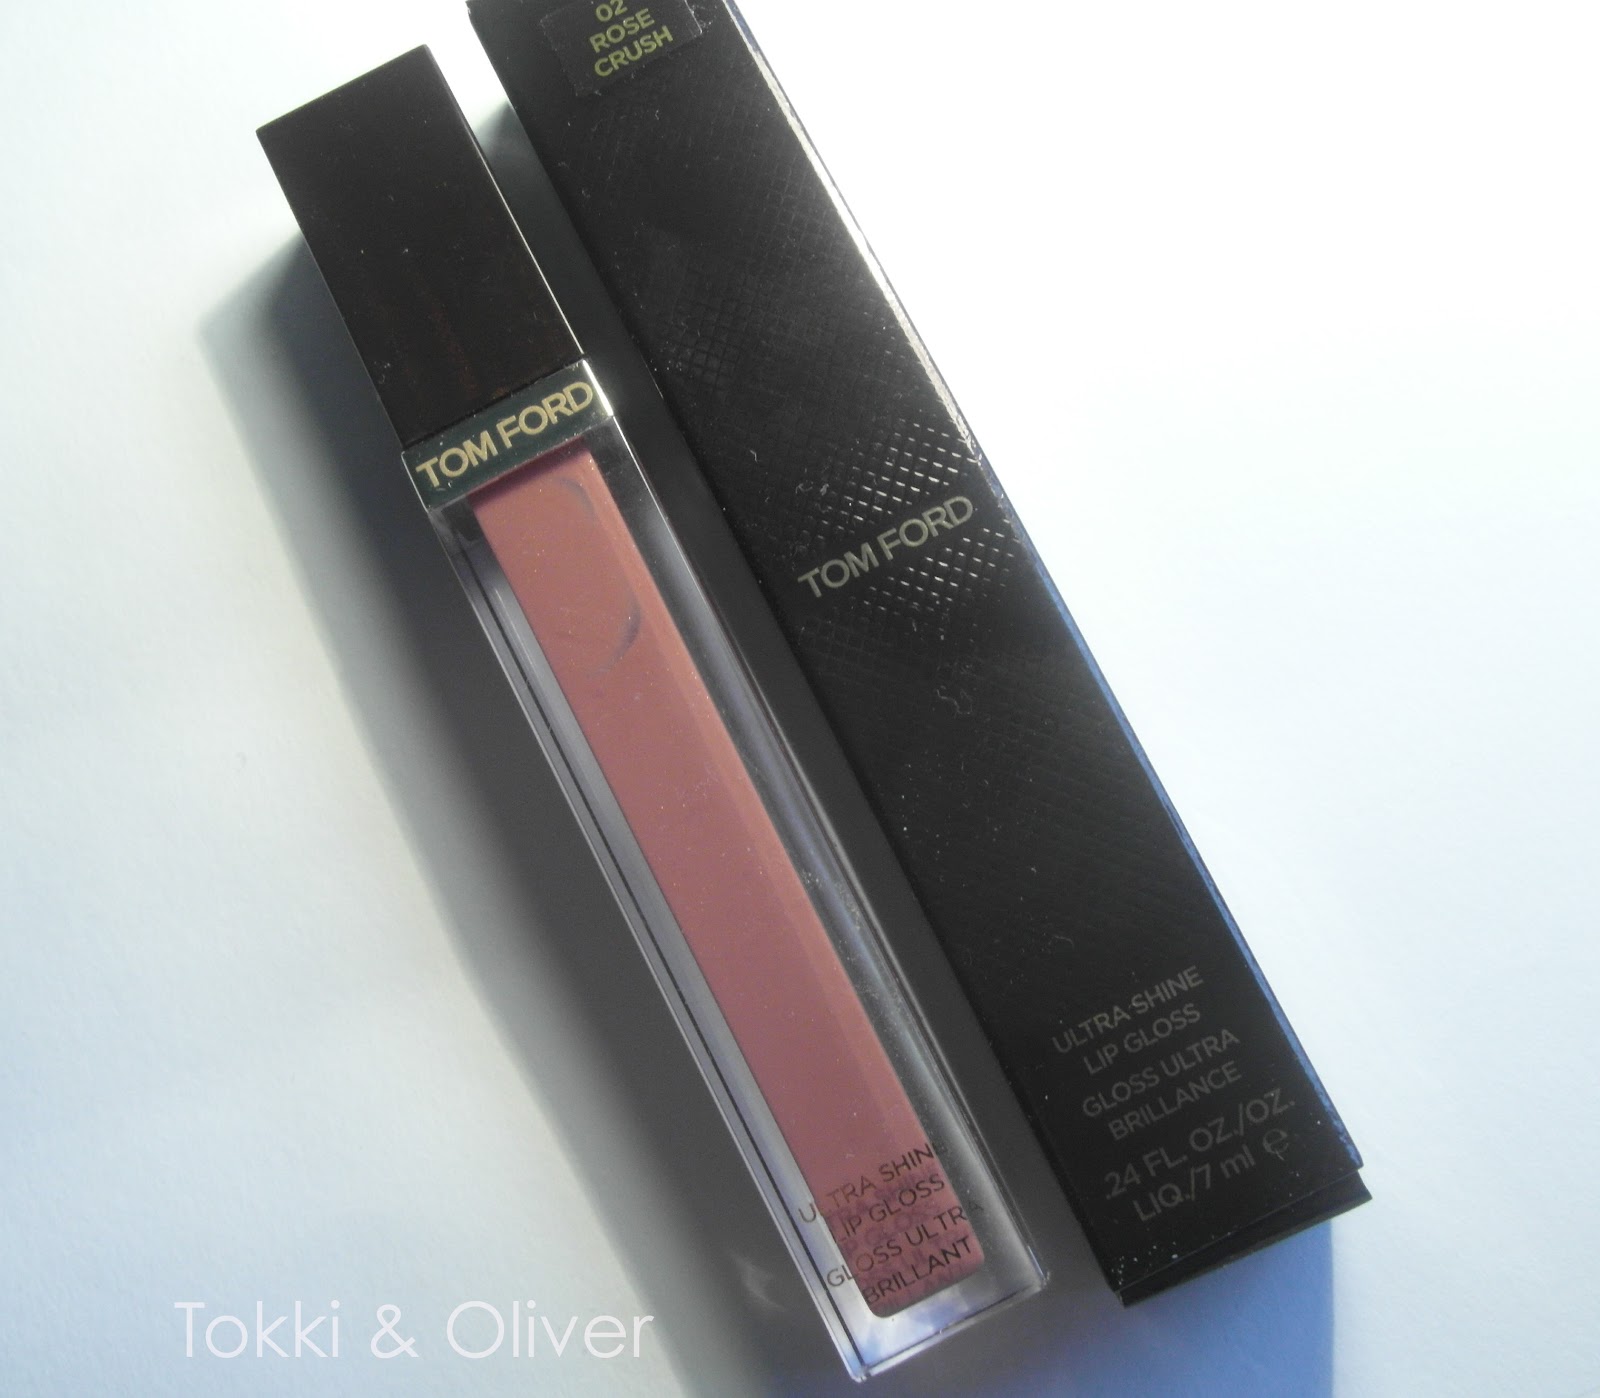 Tokki and Oliver Tom Ford Ultra Shine Lip Gloss in 02